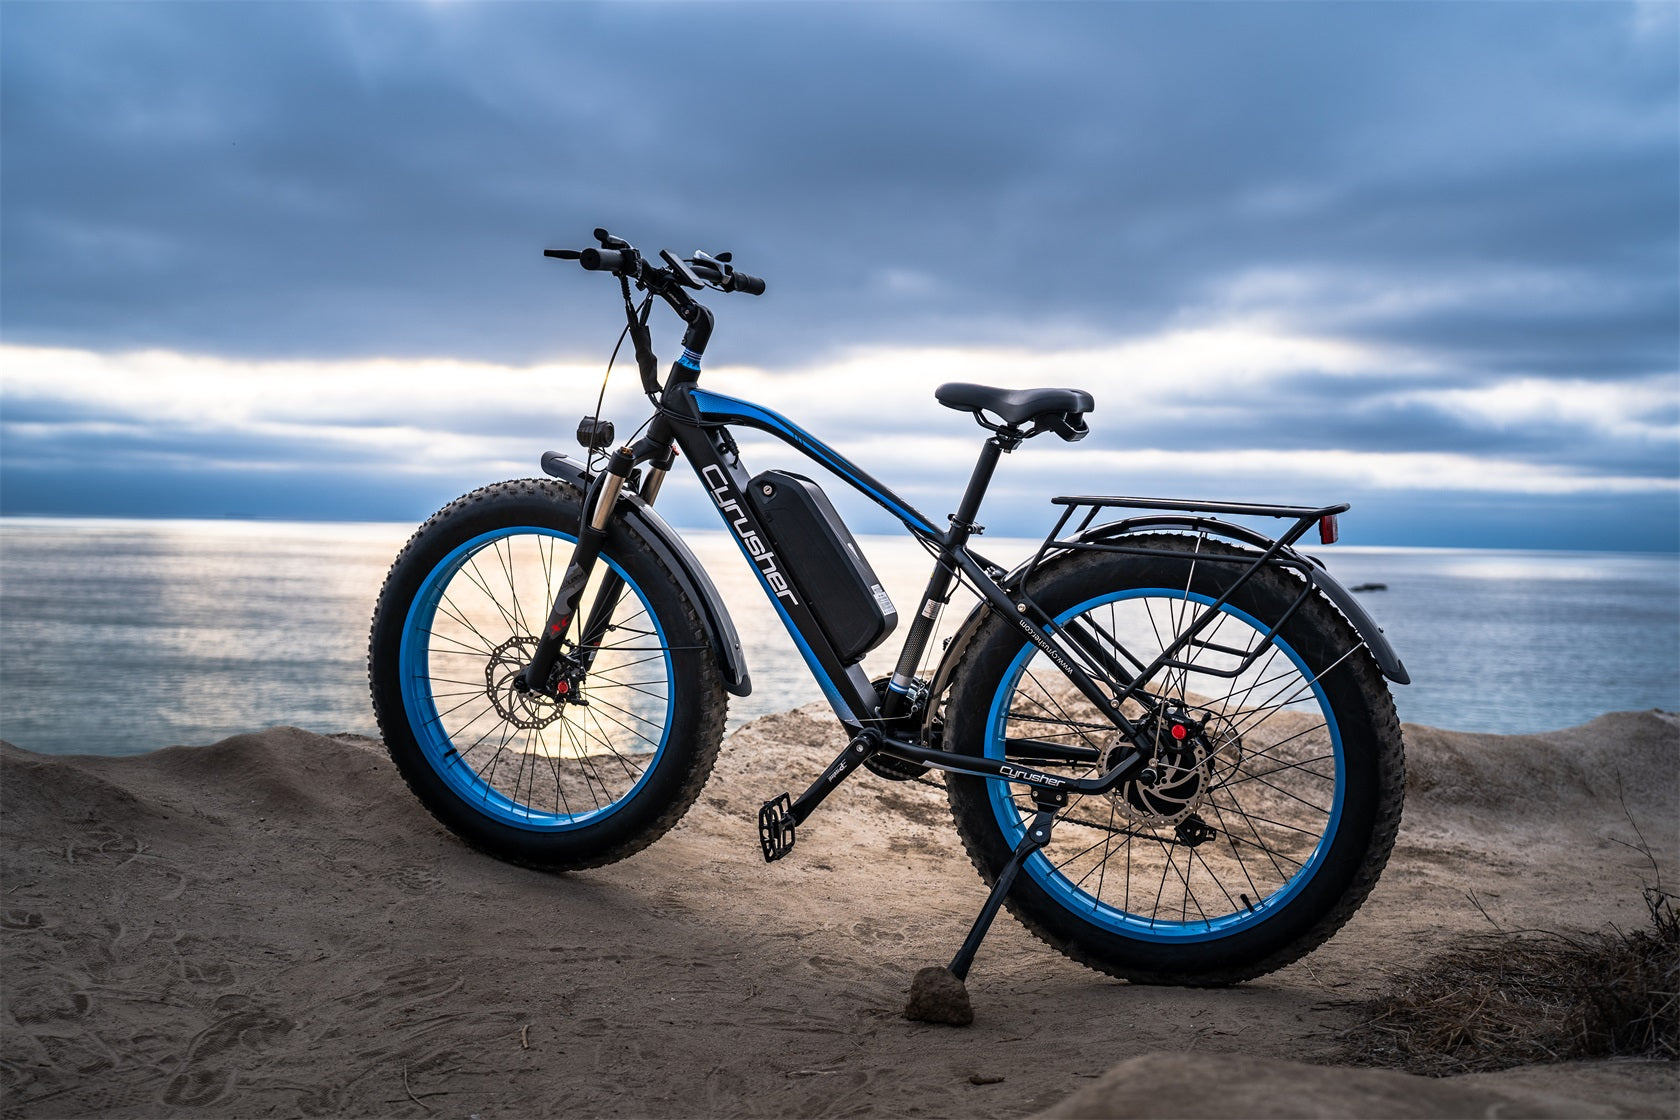 A Cyrusher XF650 electric bicycle is parked on the sand